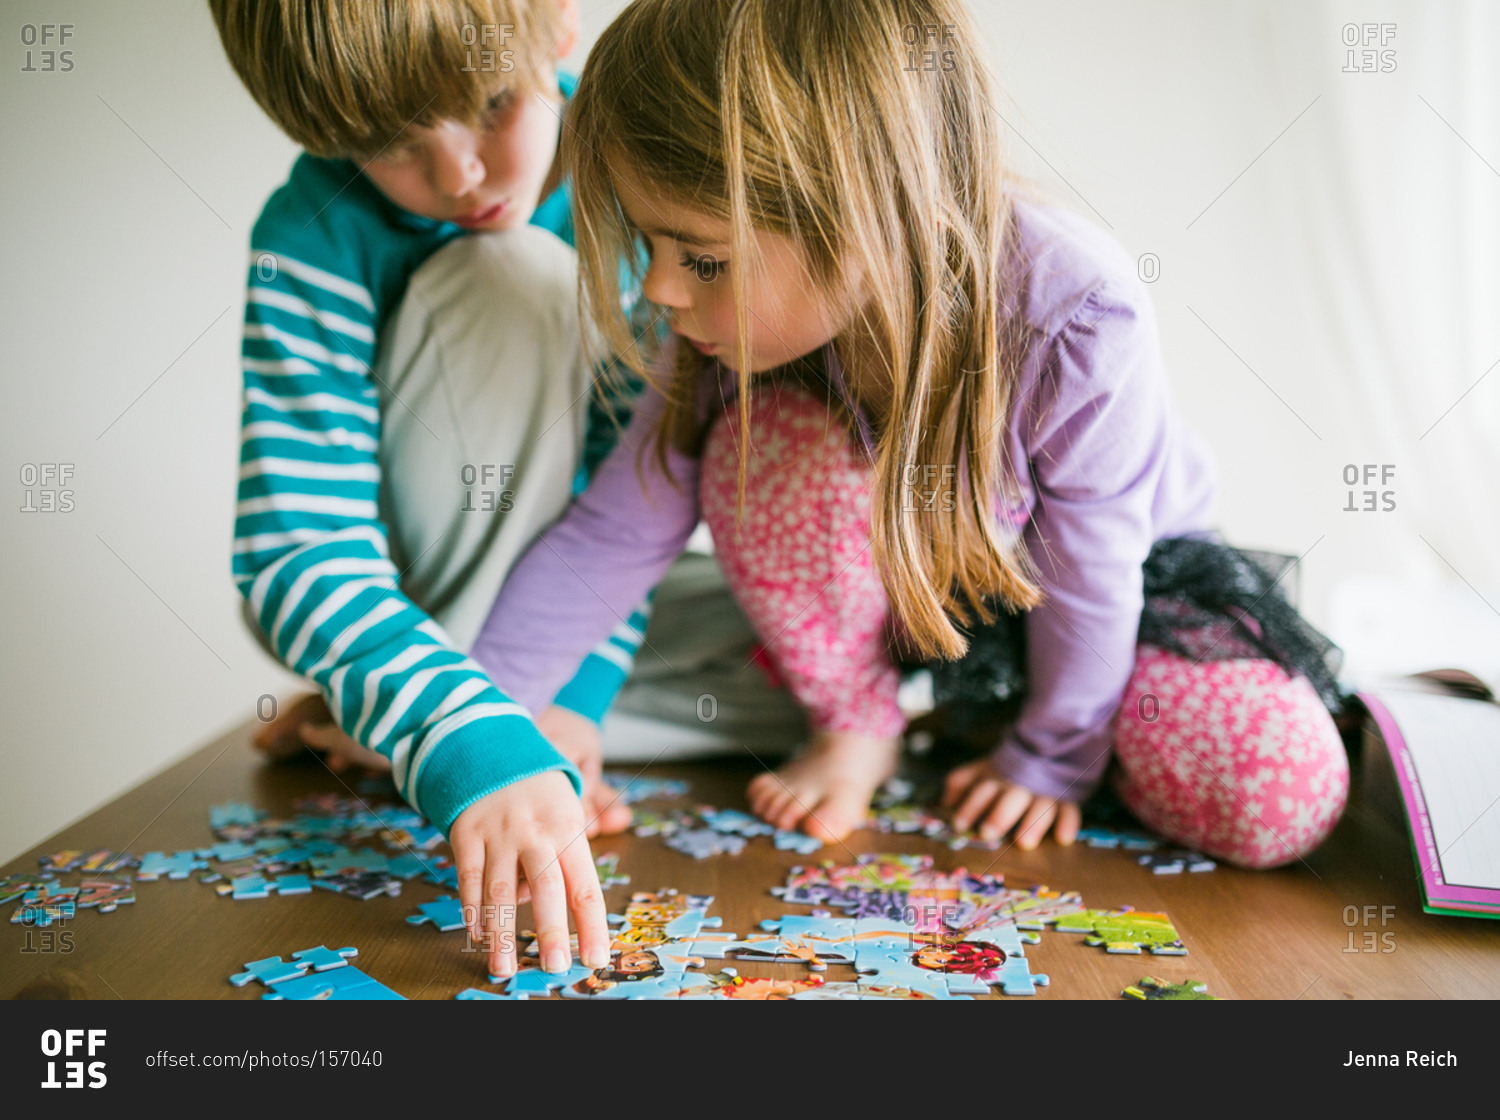 Children putting a jigsaw puzzle together stock photo - OFFSET